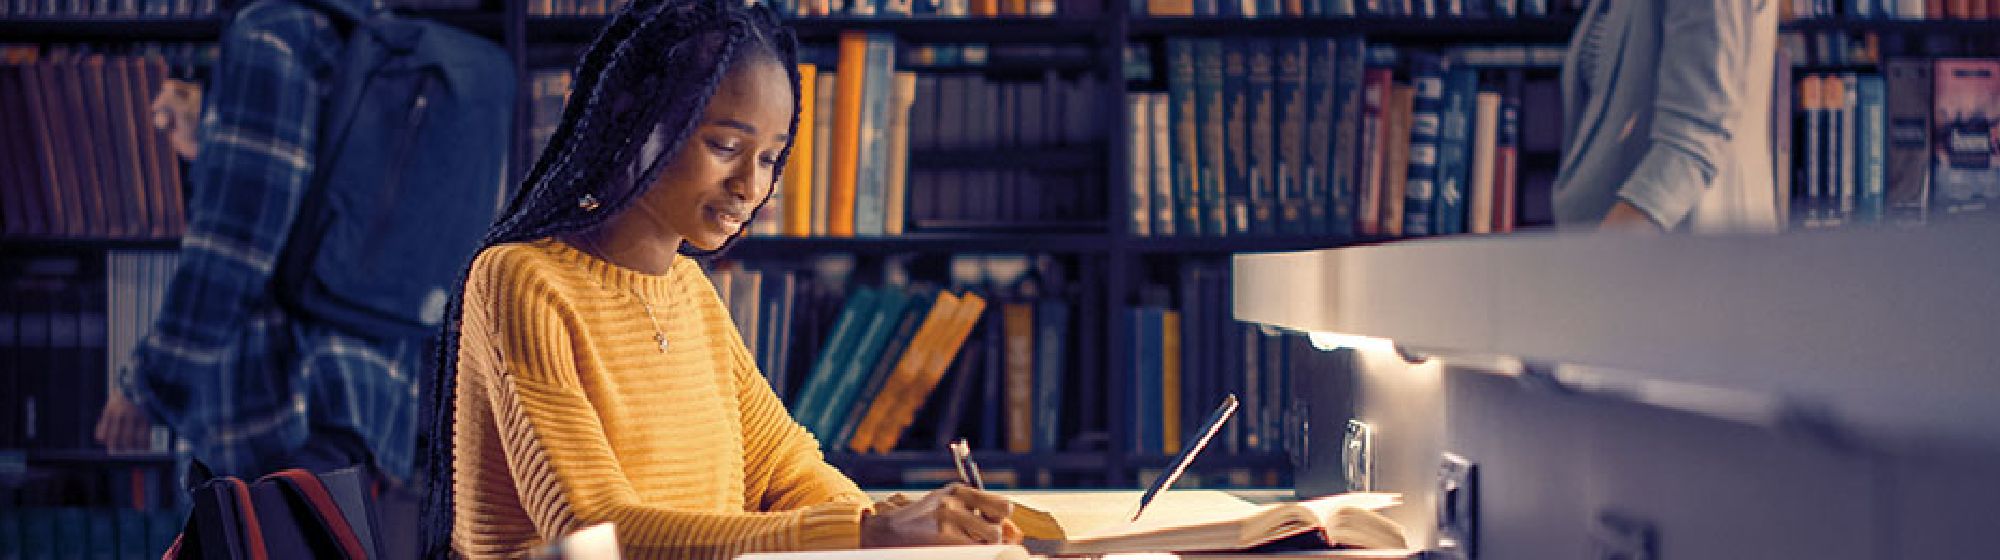 Female student studying in a library